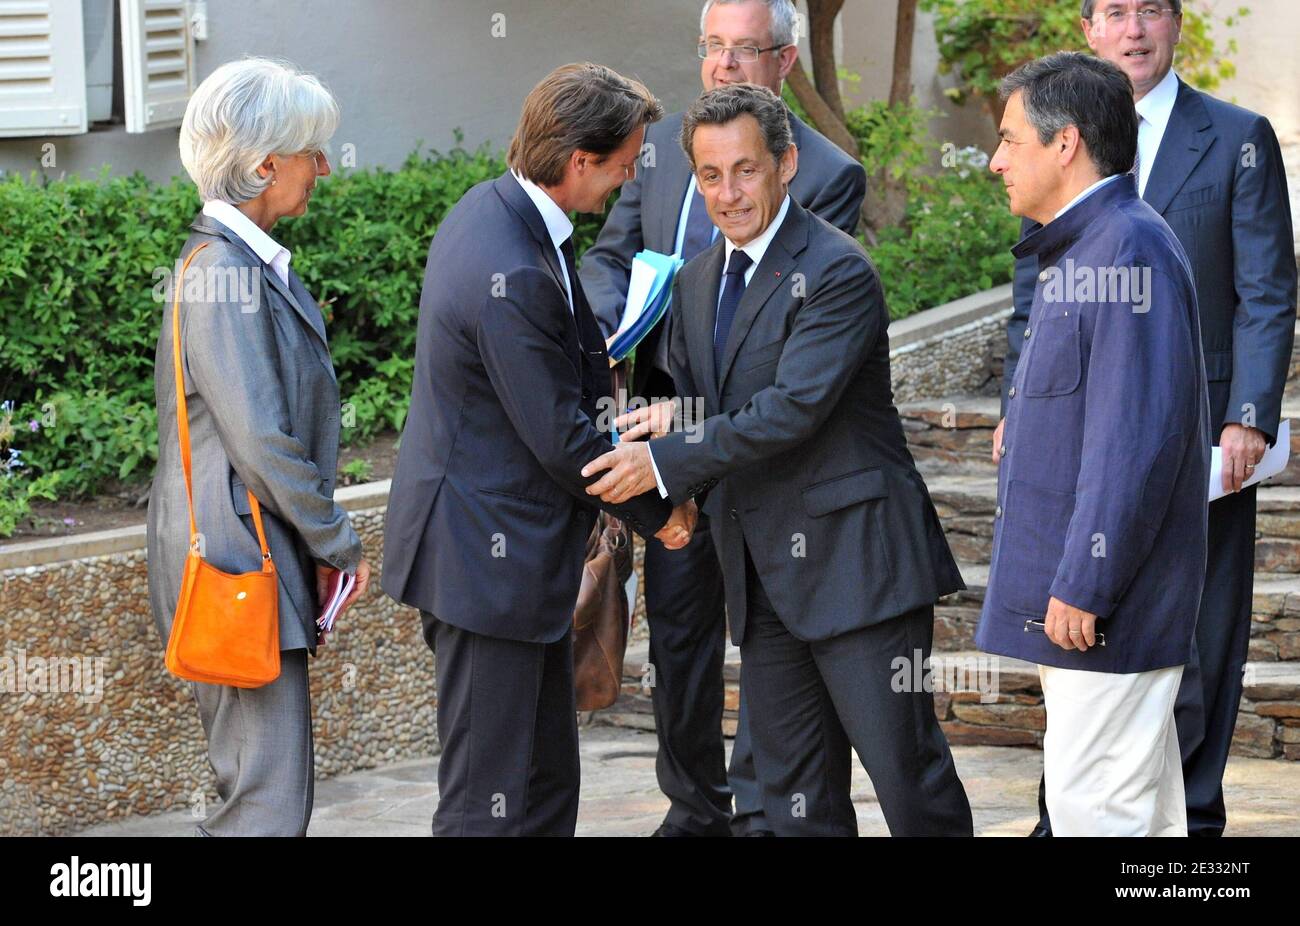 French President Nicolas Sarkozy (C) shakes hands with Budget minister Francois Barouin as Prime Minister Francois Fillon (R) and Economy minister Christine Lagarde (L) look on as they leave the Fort of Bregancon, the presidential summer residence in Bormes-les-Mimosas, southern France on August 20, 2010, after a meeting to tackle the economy and spiralling public deficit. Photo by ABACAPRESS.COM Stock Photo